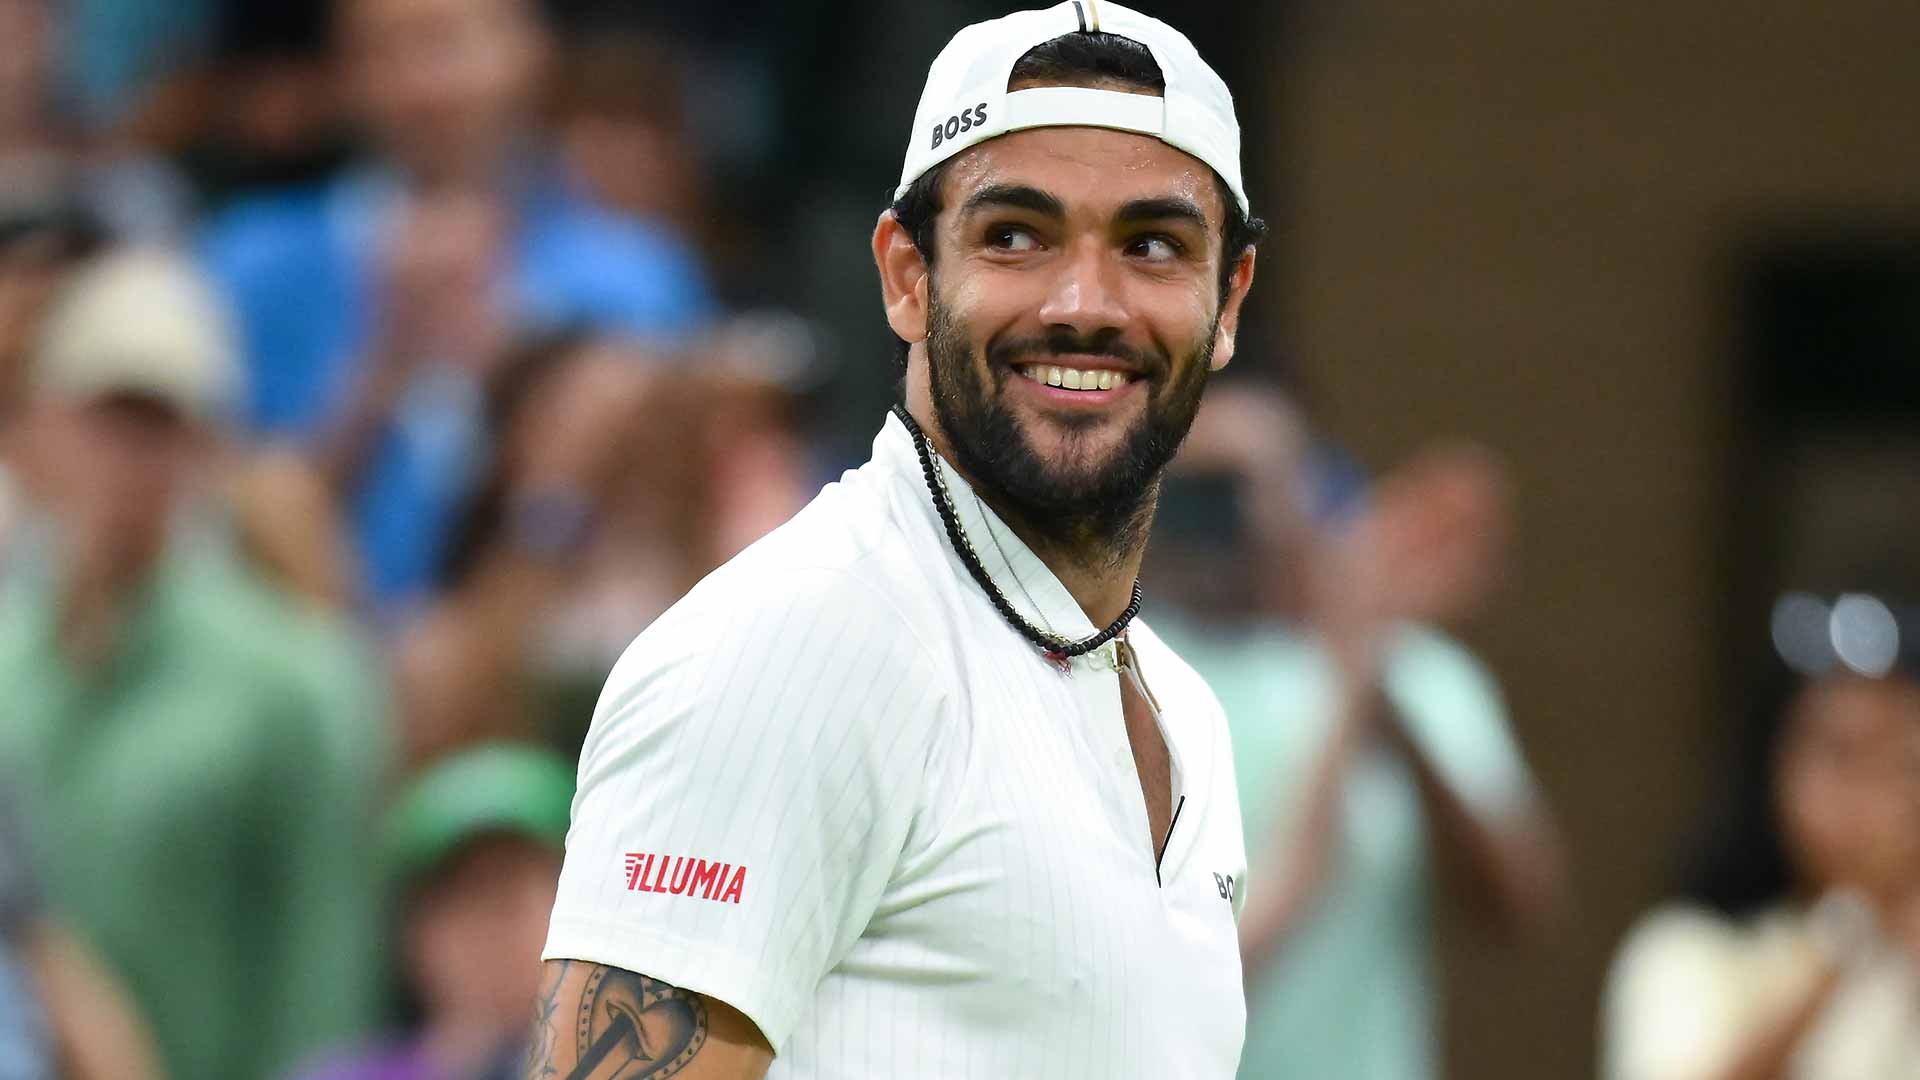 Matteo Berrettini is into the second week at Wimbledon for the third time.